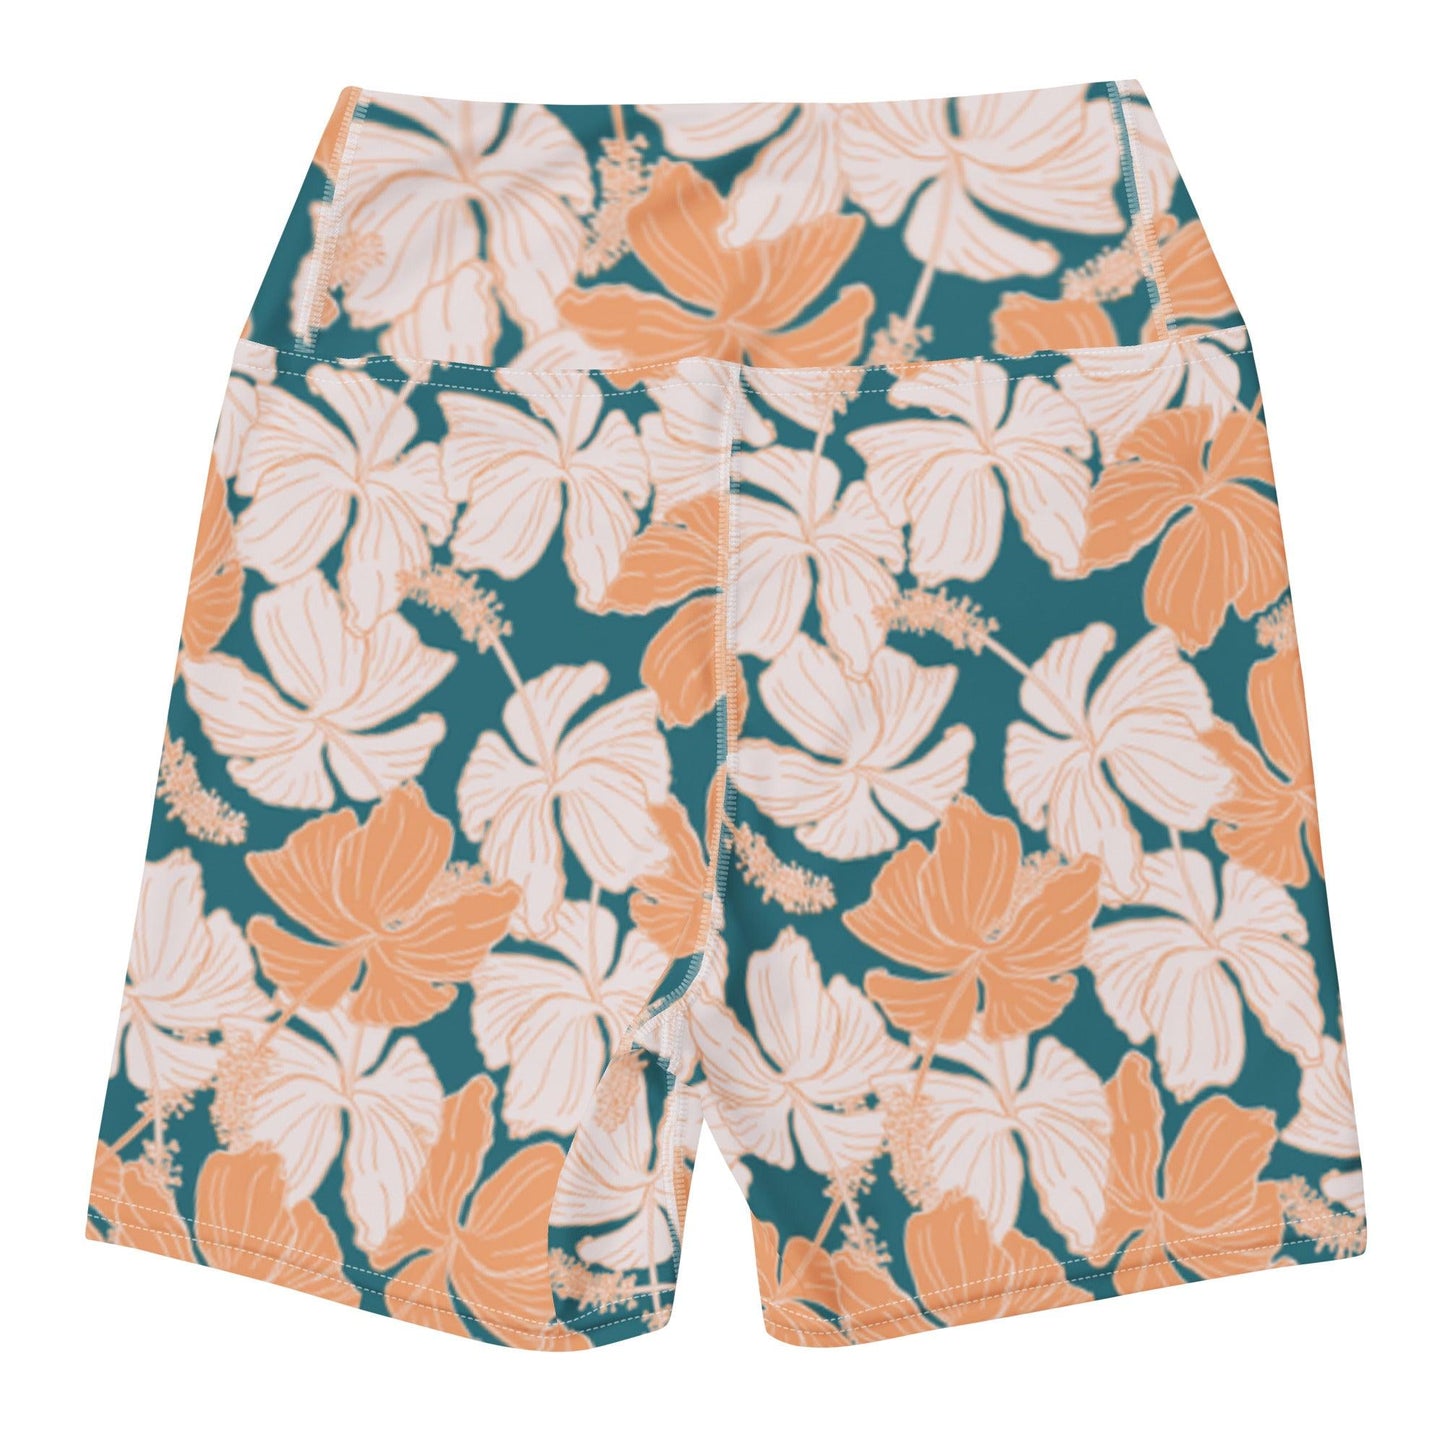 Vintage Hibiscus in Coral/Turquoise High Waisted Shorts - Solshine and Co